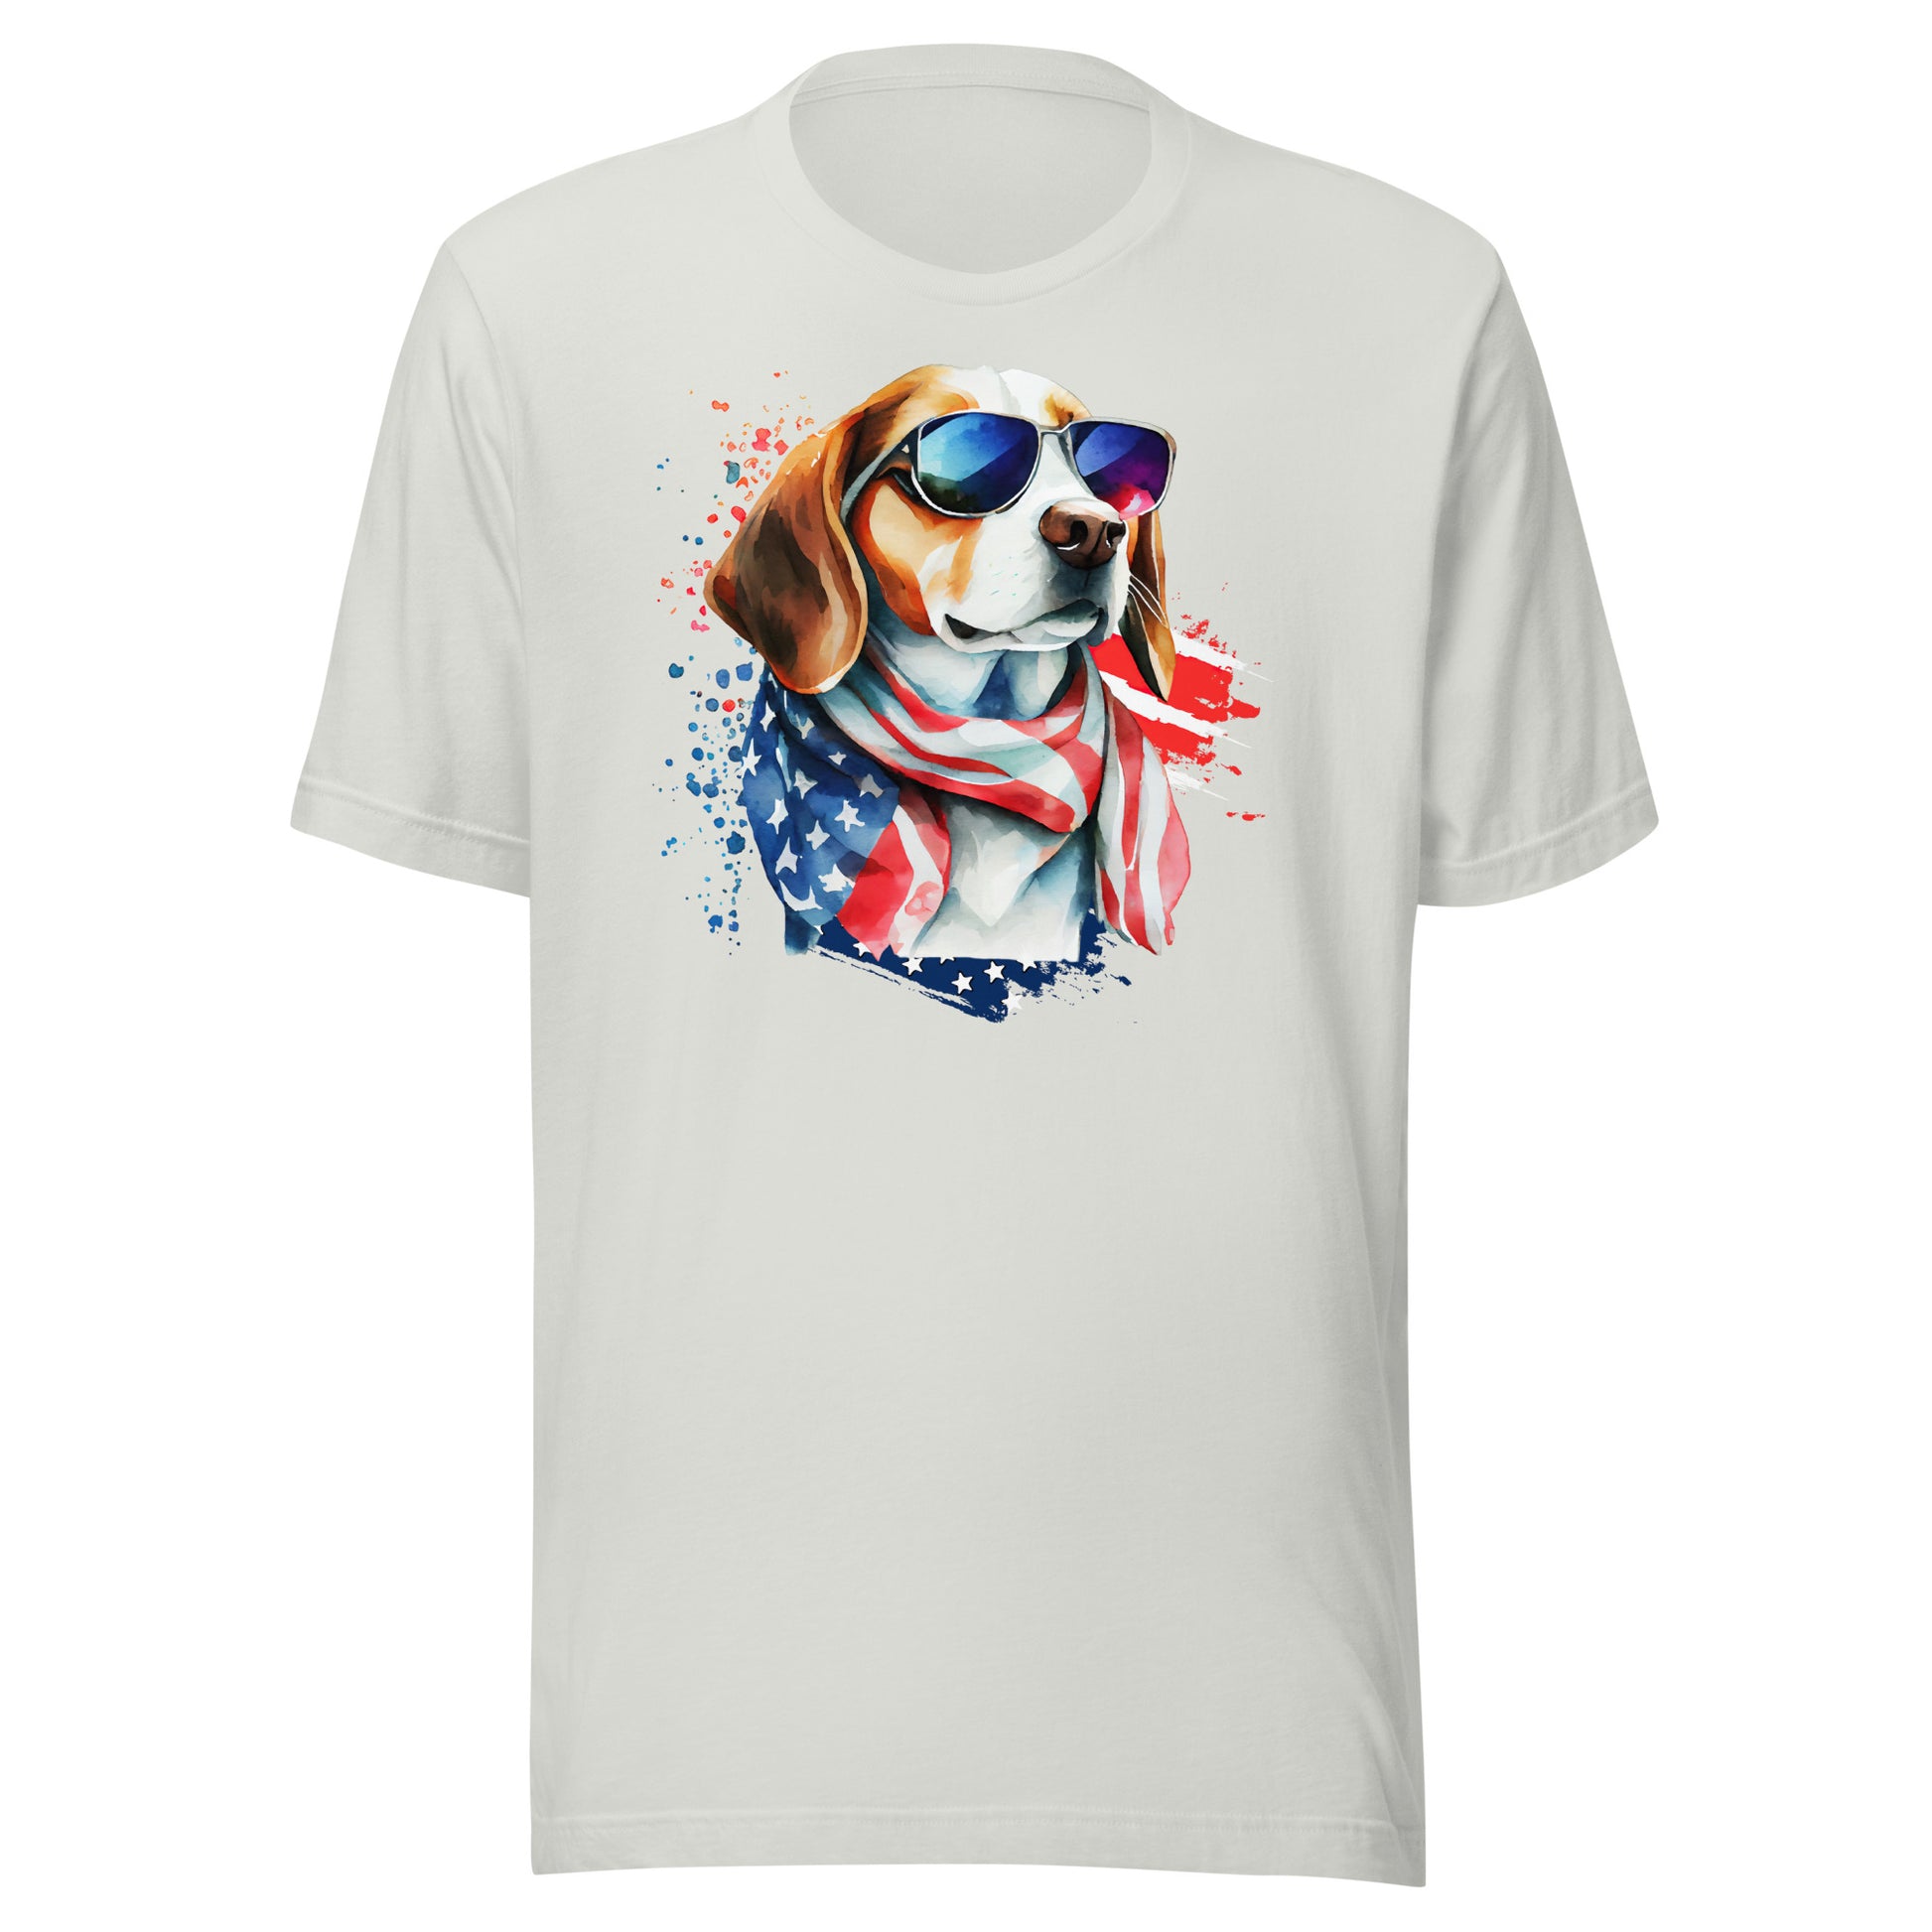 White US Patriotic Dog Shirt For Beagle lover XS - 5XL